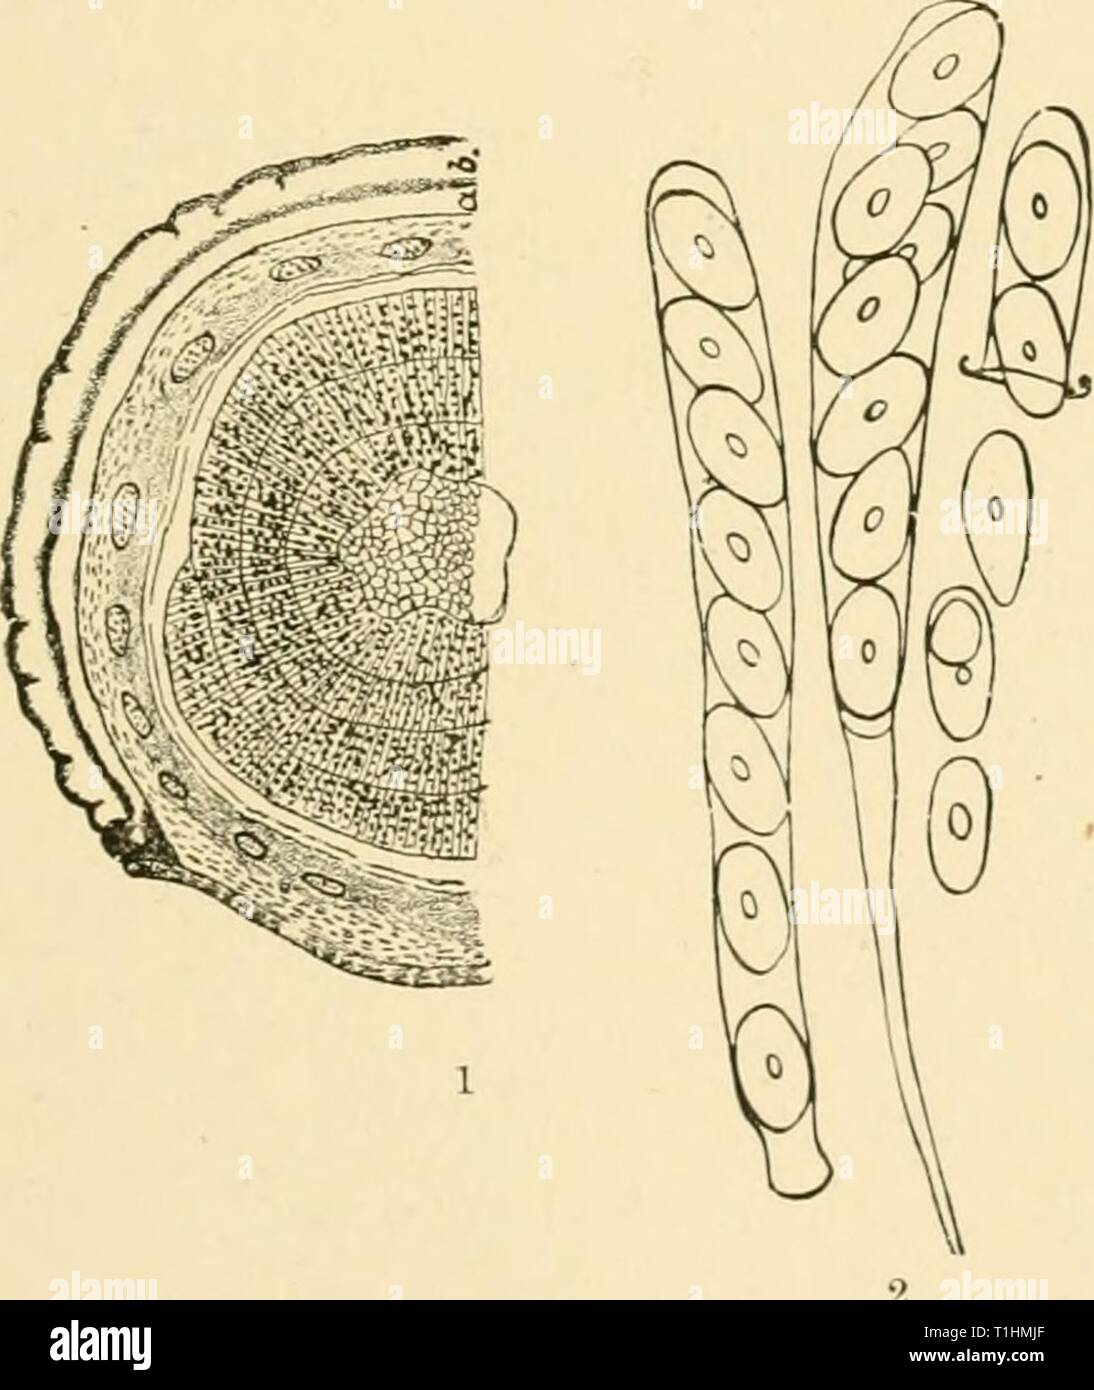 Diseases of plants induced by Diseases of plants induced by cryptogamic parasites; introduction to the study of pathogenic Fungi, slime-Fungi, bacteria, & Algae  diseasesofplants00tube Year: 1897  CRYPTOMYCES. 247 especially Salve mcana, but also on S. 2urpurca. When the black apothecial cushions break out through the bark, the twigs of the host-plant are frequently still green and leaf-clad. The apothecia originate in the lower bark and so loosen the epidermal layers as to cause the appearance of yellow spots. Black centres appear in the spots, due to the formation of a    Fig. 132.—Cryptomyc Stock Photo